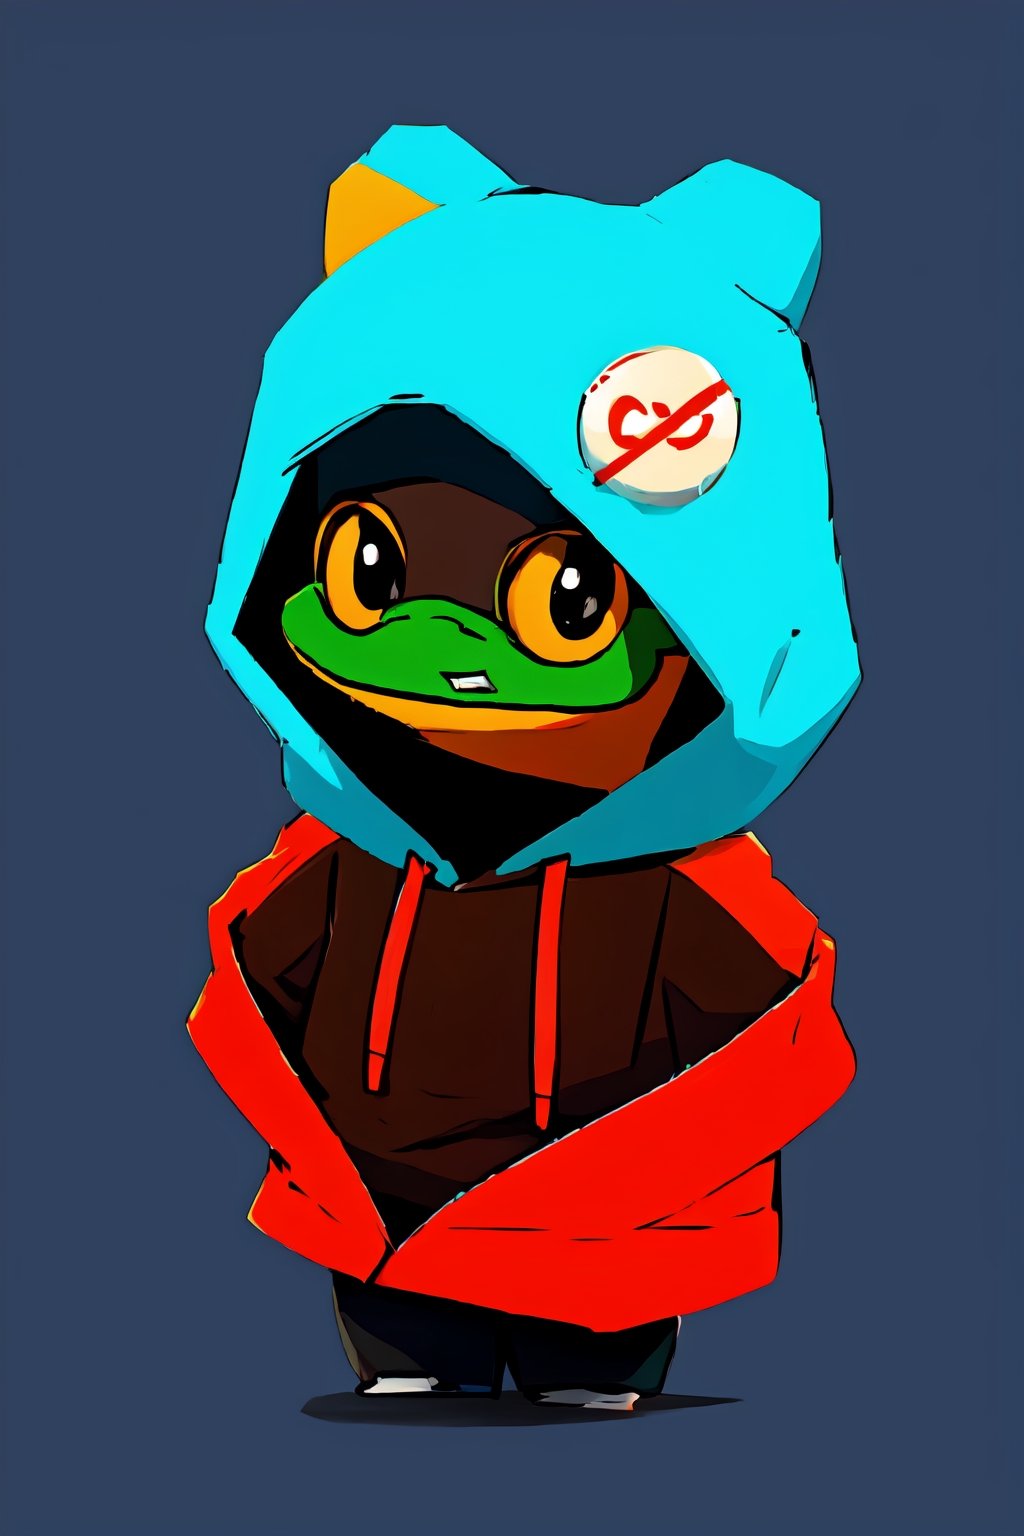 style of Justin Maller, a frogy, hoody on, warm colors, simple  background, Illustration, japan, minimalistic, cutestickers